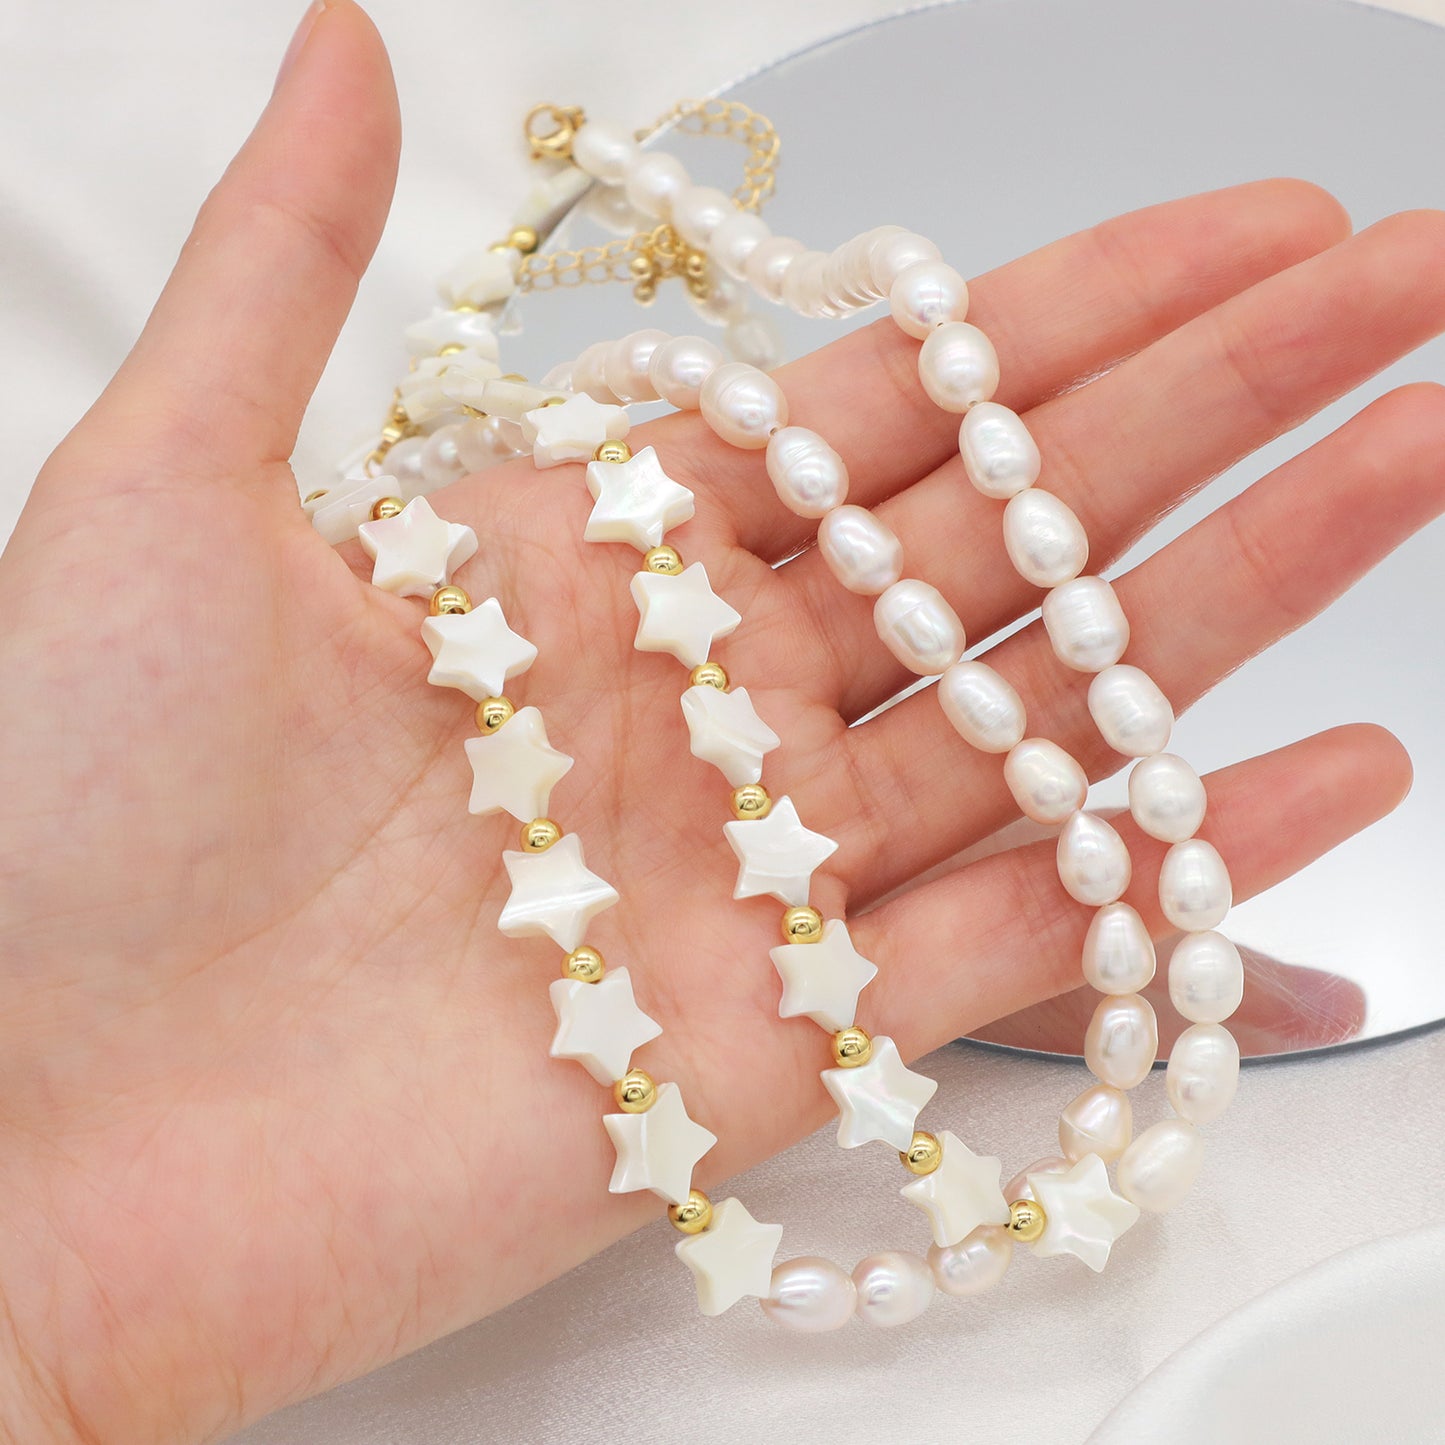 ODM Factory Manufacture Elegant Women Girls pearl accessory Jewelry Gold Plated Beads Star freshwater pearl Choker necklace